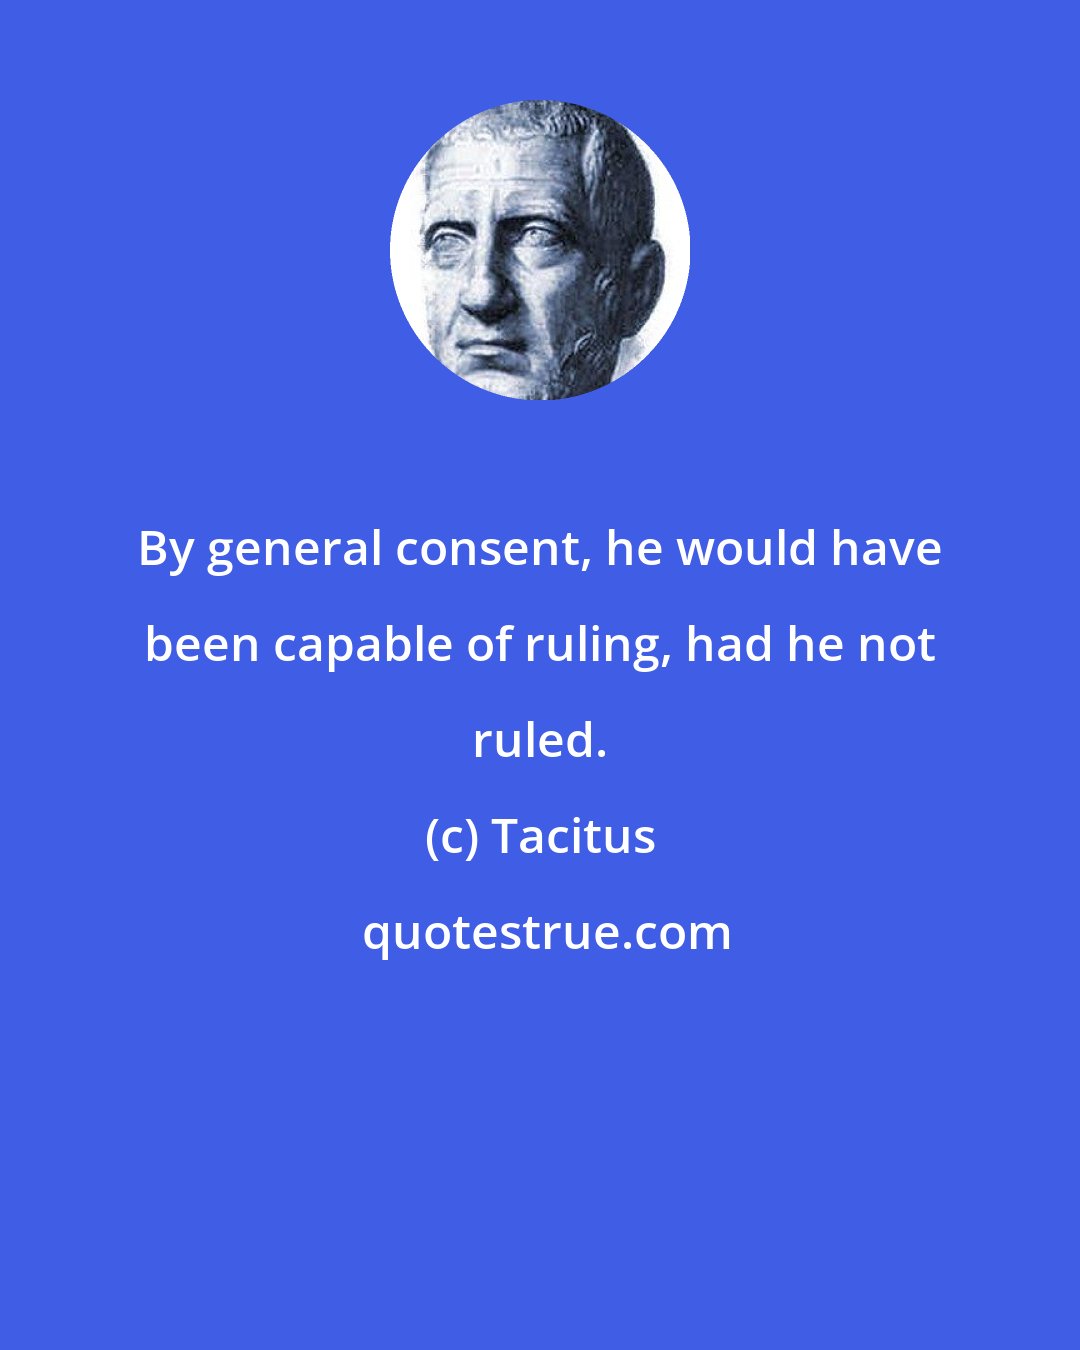 Tacitus: By general consent, he would have been capable of ruling, had he not ruled.